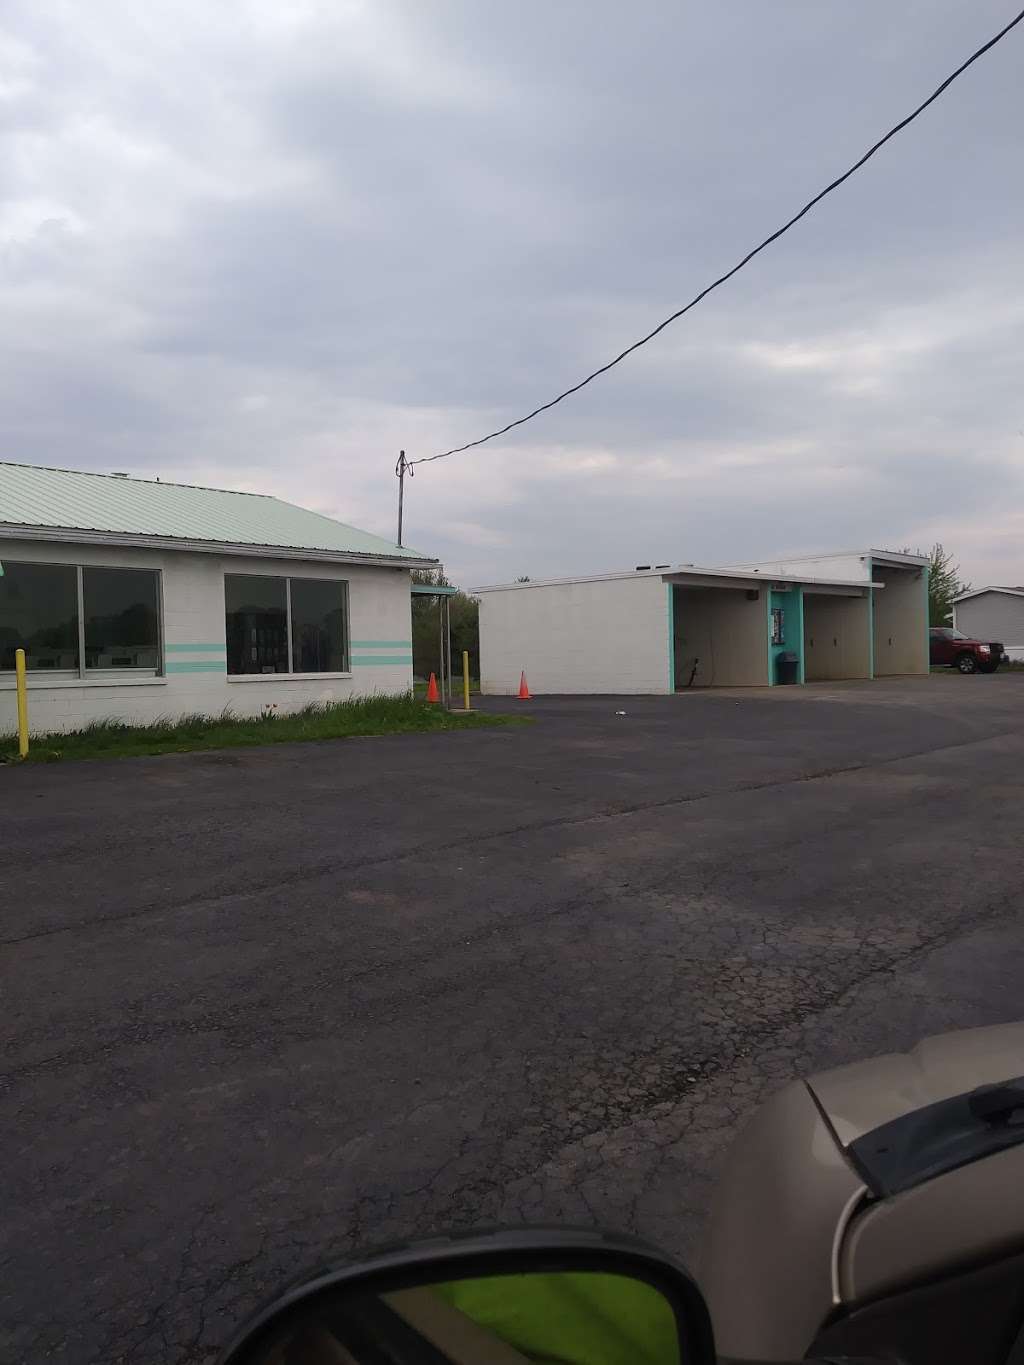 Old 22 Laundry And Car Wash | Old U.S. 22, Bernville, PA 19506